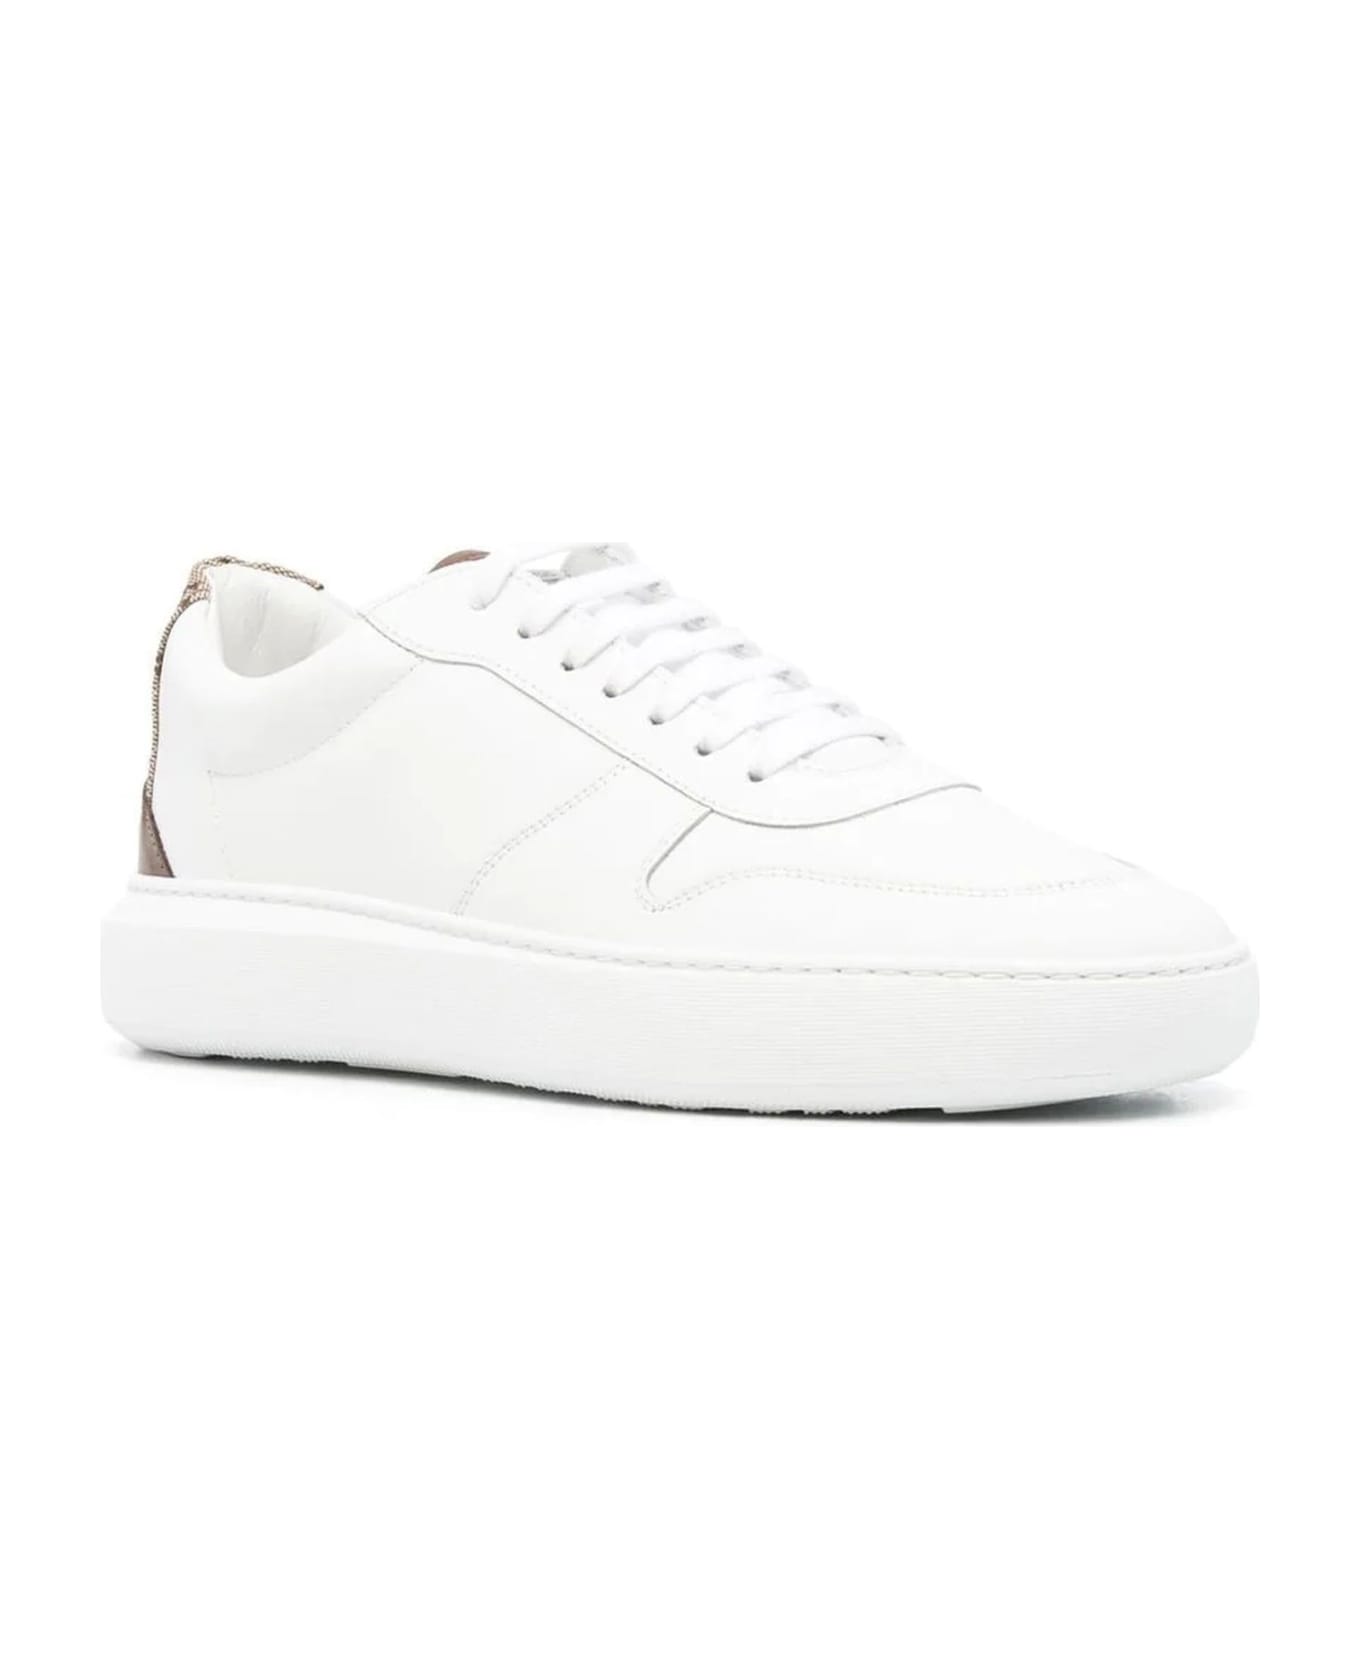 Herno White Calf Leather Sneakers - Bianco